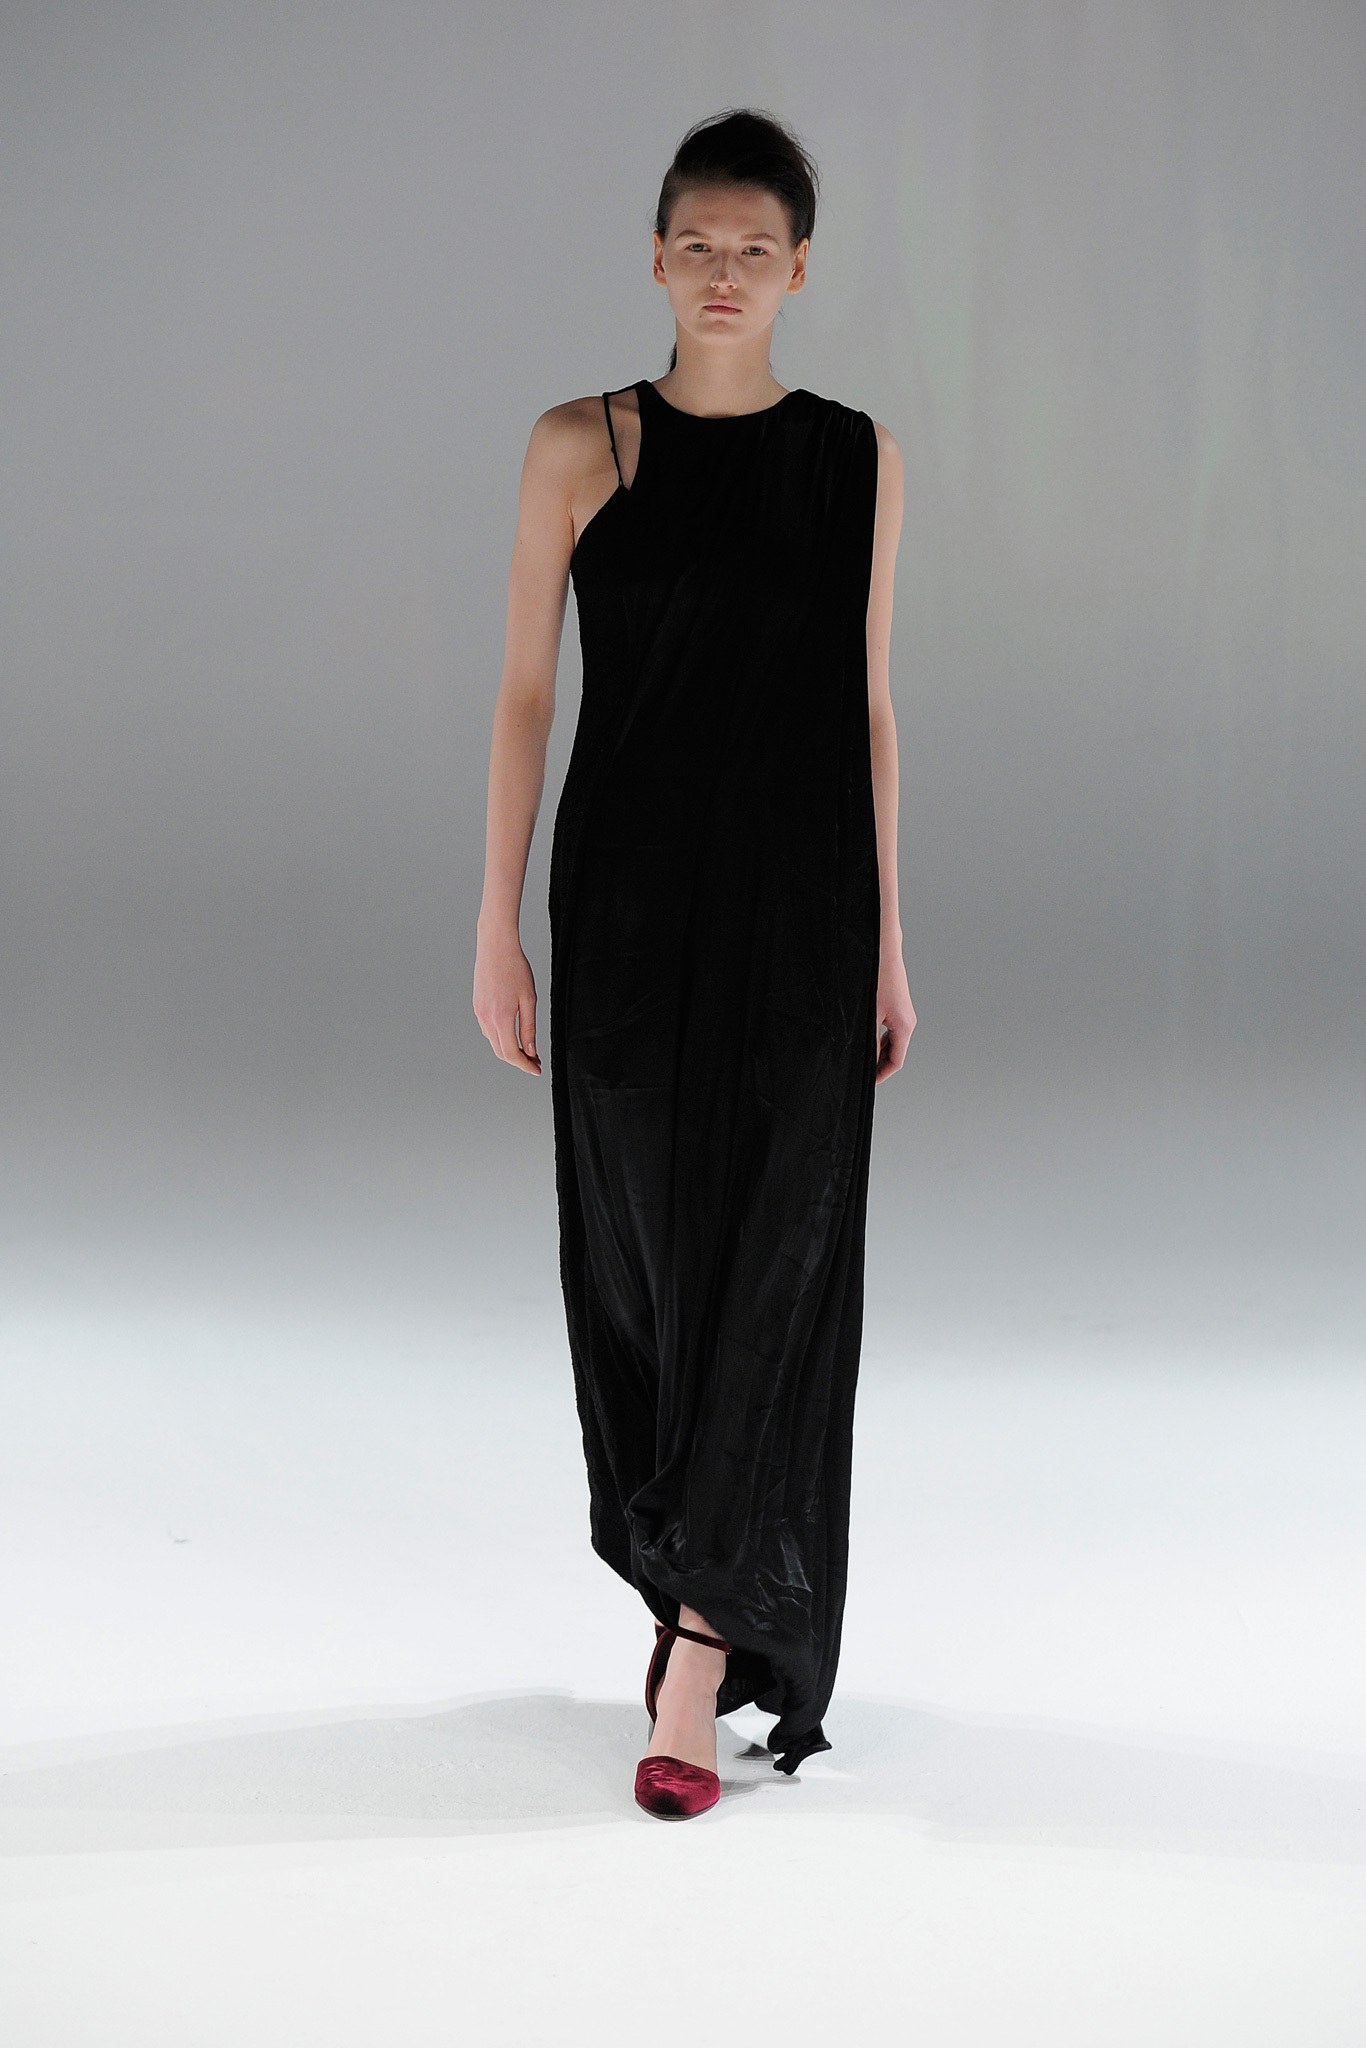  A transforming dress in Hussein Chalayan's Fall 2013 runway show. Image from Vogue.com. 